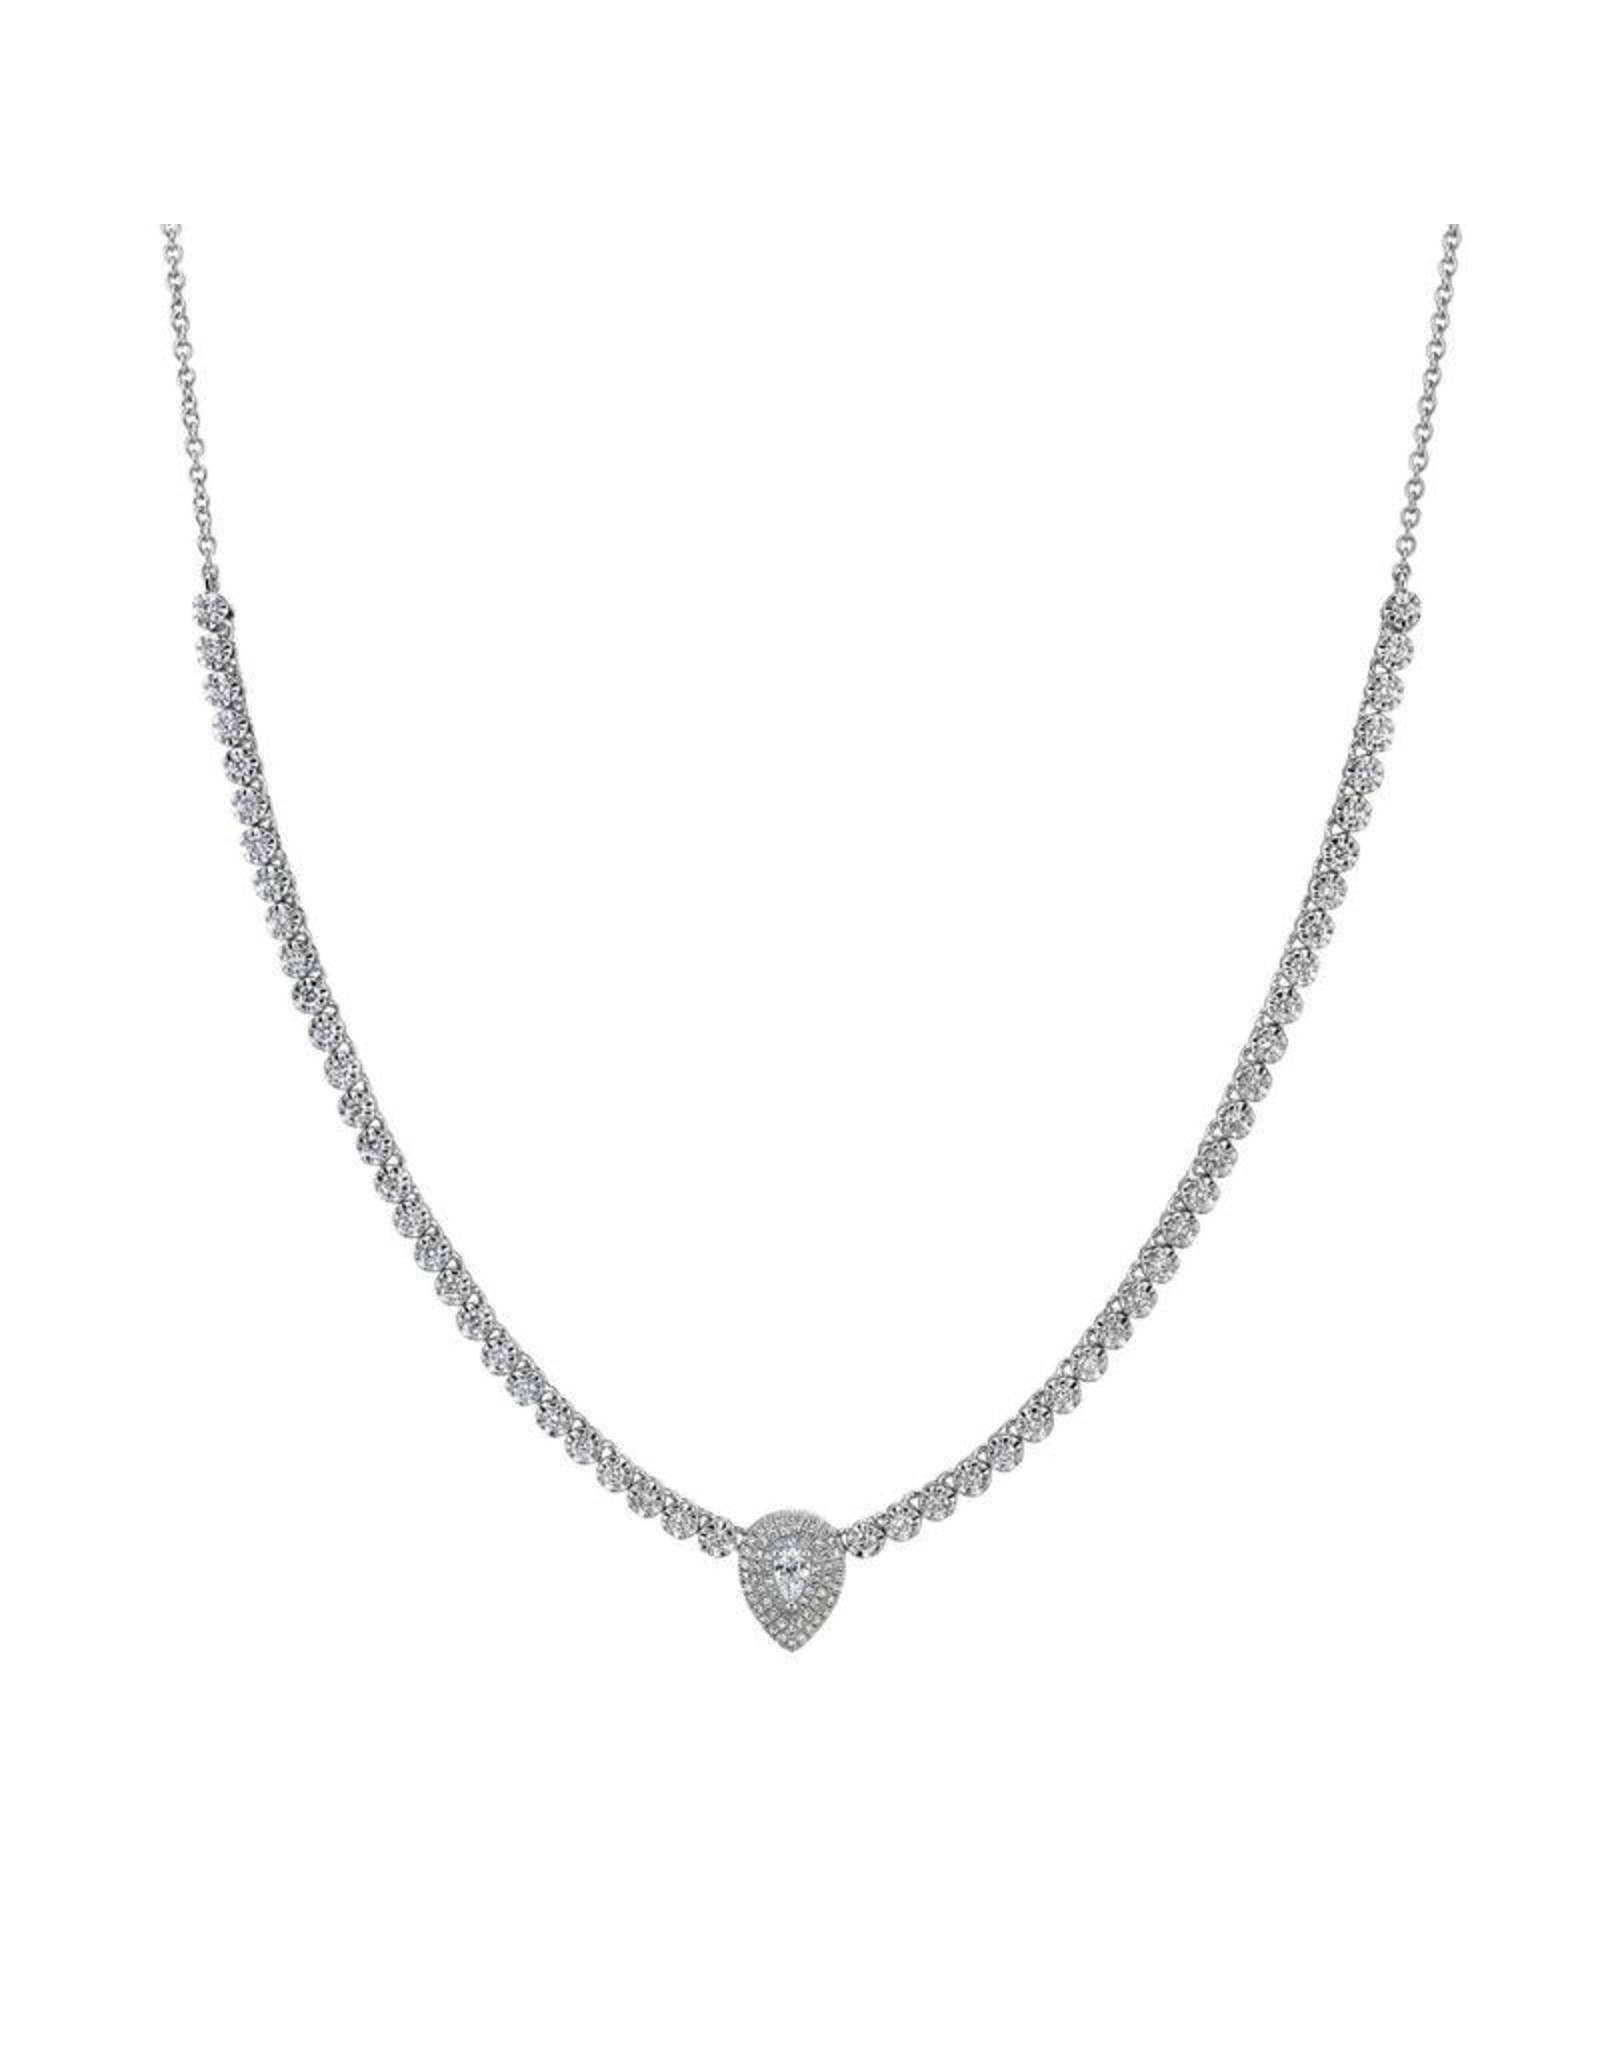 14K White Gold Pear and Round Half Diamond Tennis Necklace, D: 1.28ct